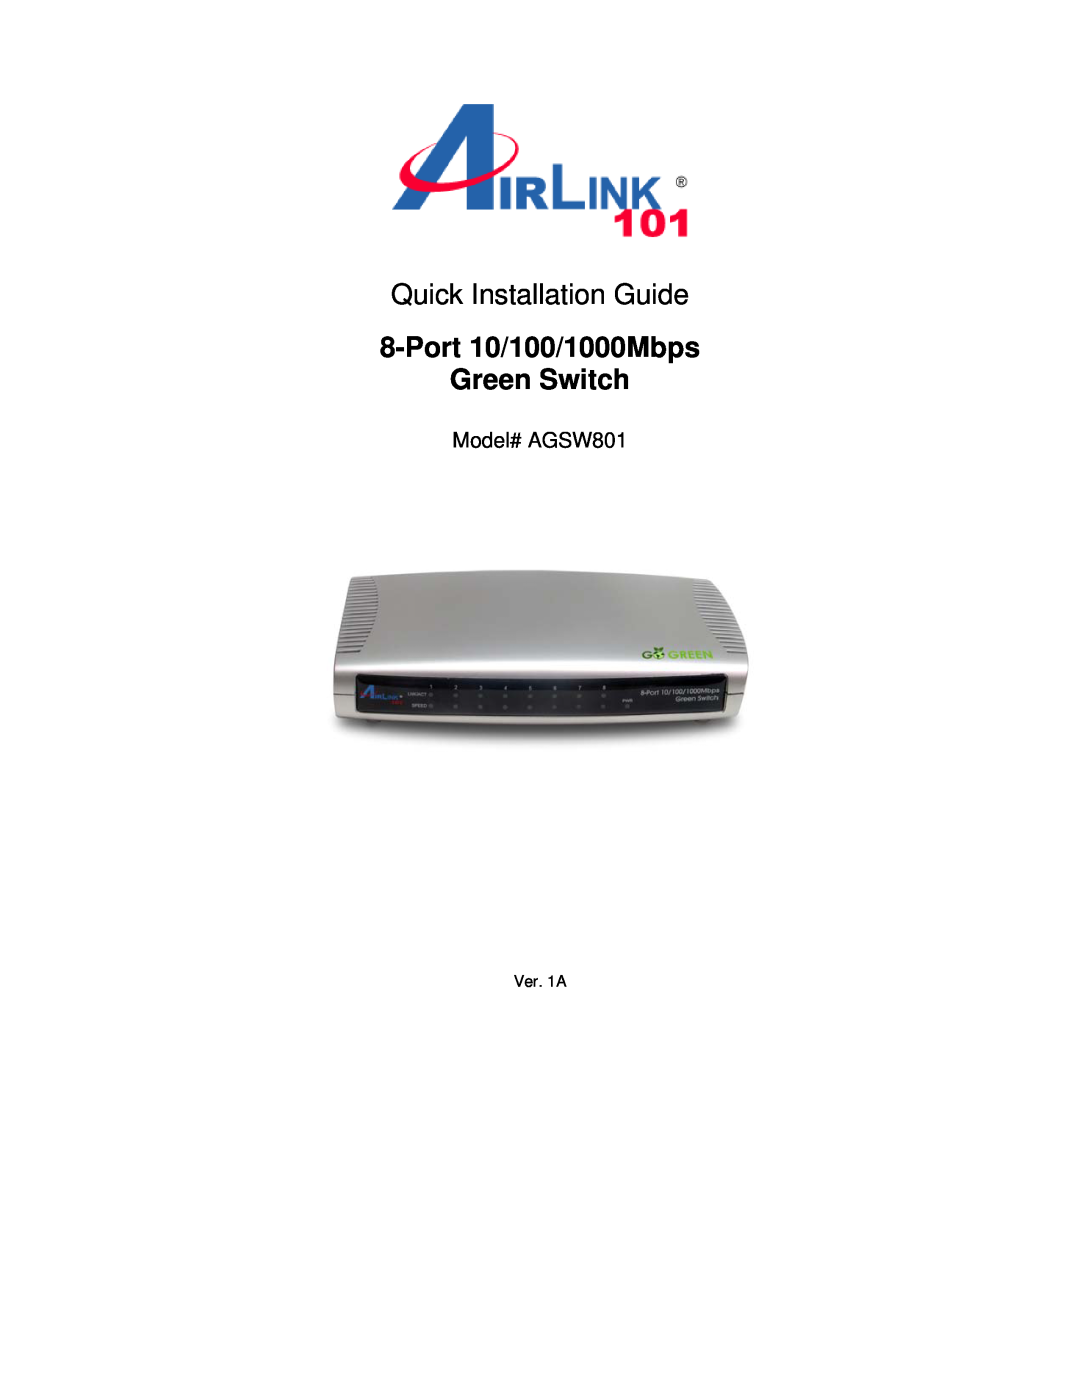 Airlink101 manual Quick Installation Guide, Port 10/100/1000Mbps Green Switch, Model# AGSW801 